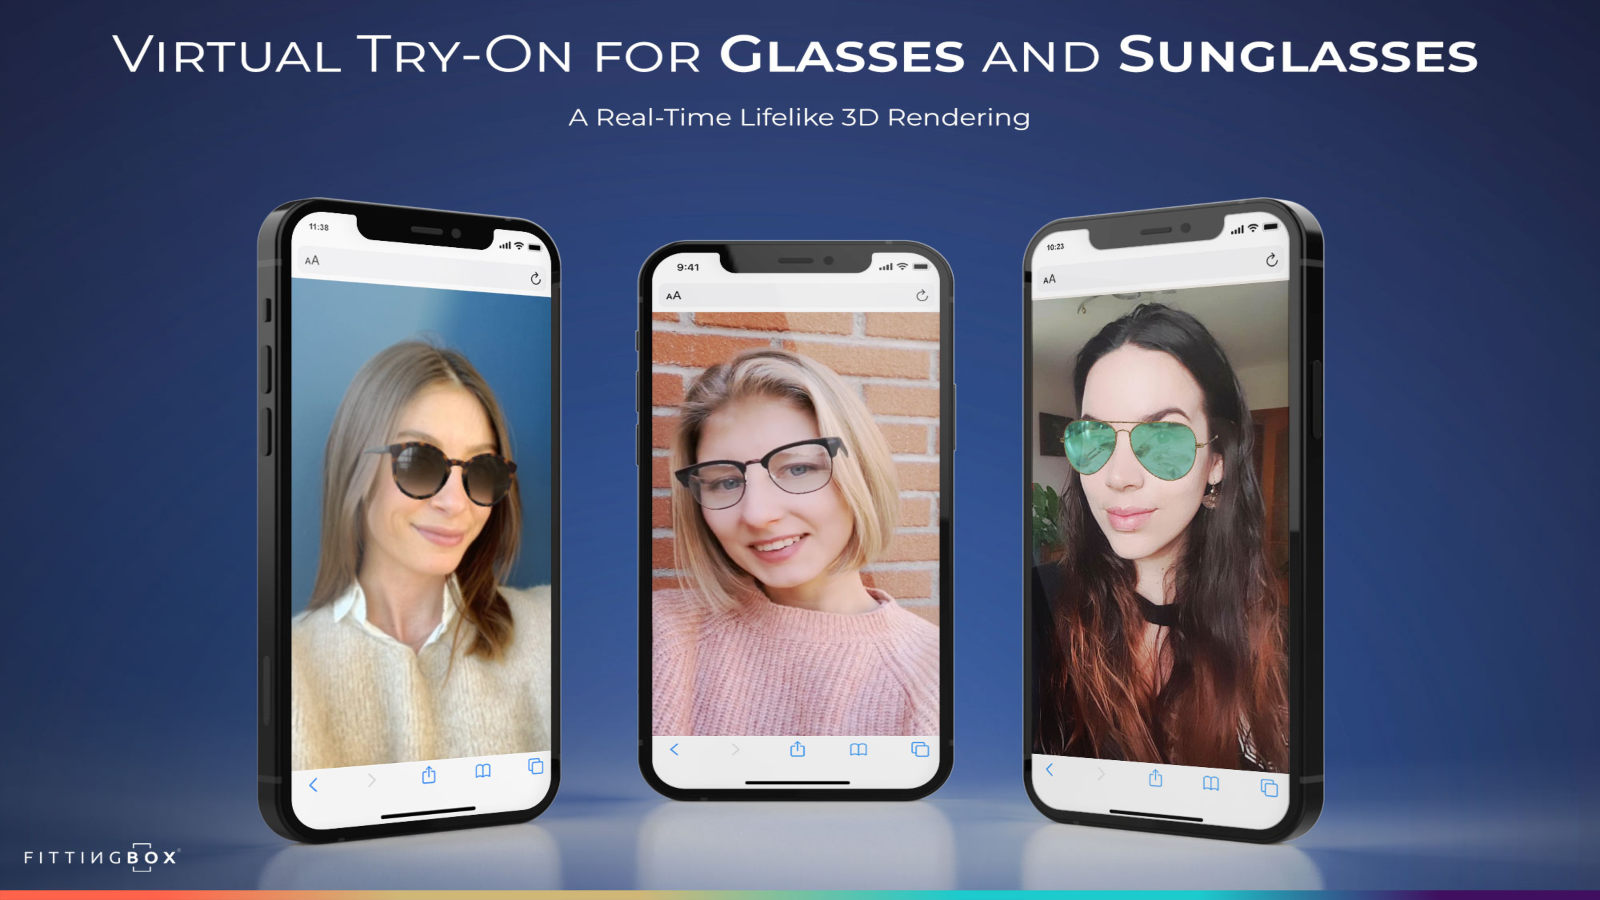 VIRTUAL TRY-ON FOR GLASSES AND SUNGLASSES